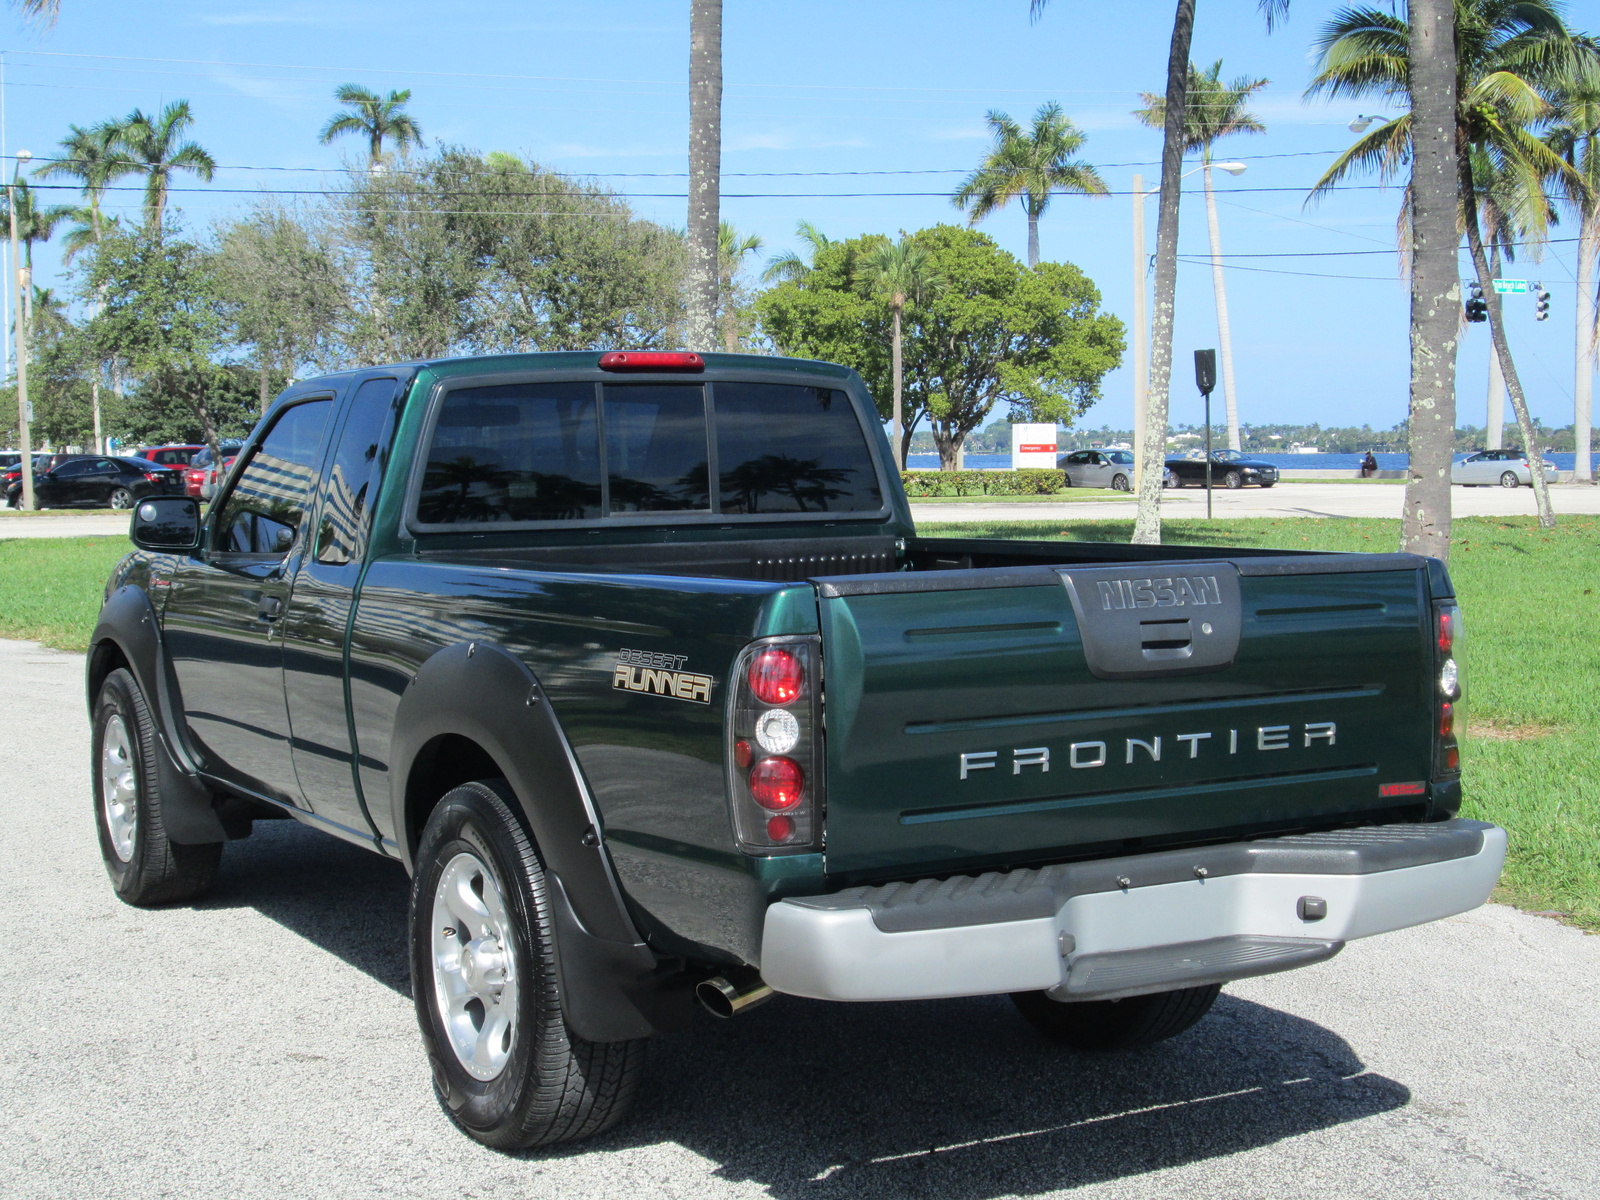 2001 Nissan frontier supercharged reviews #6